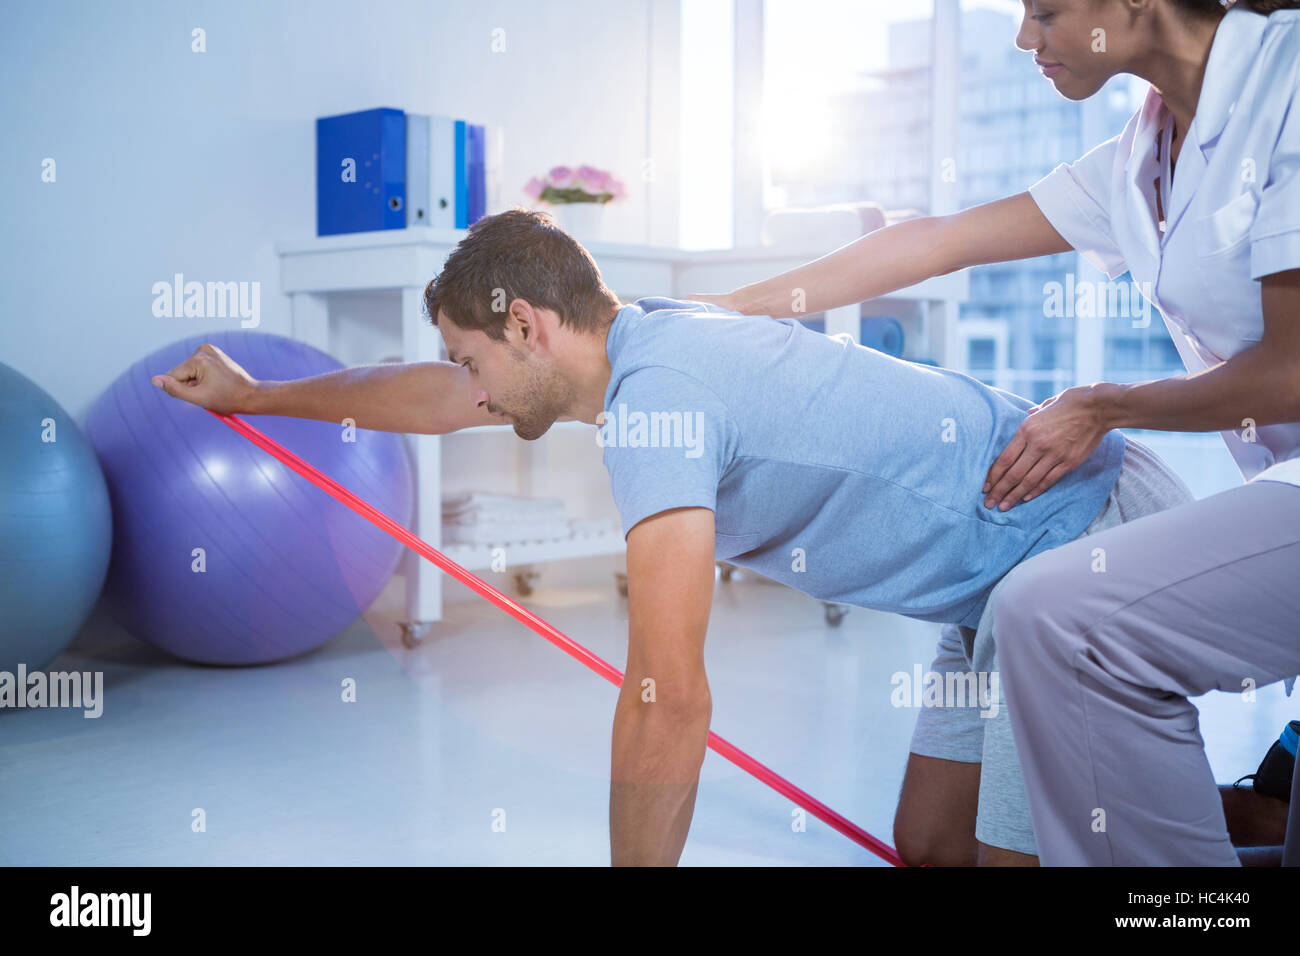 Female physiotherapist assisting a male patient while exercising Stock Photo